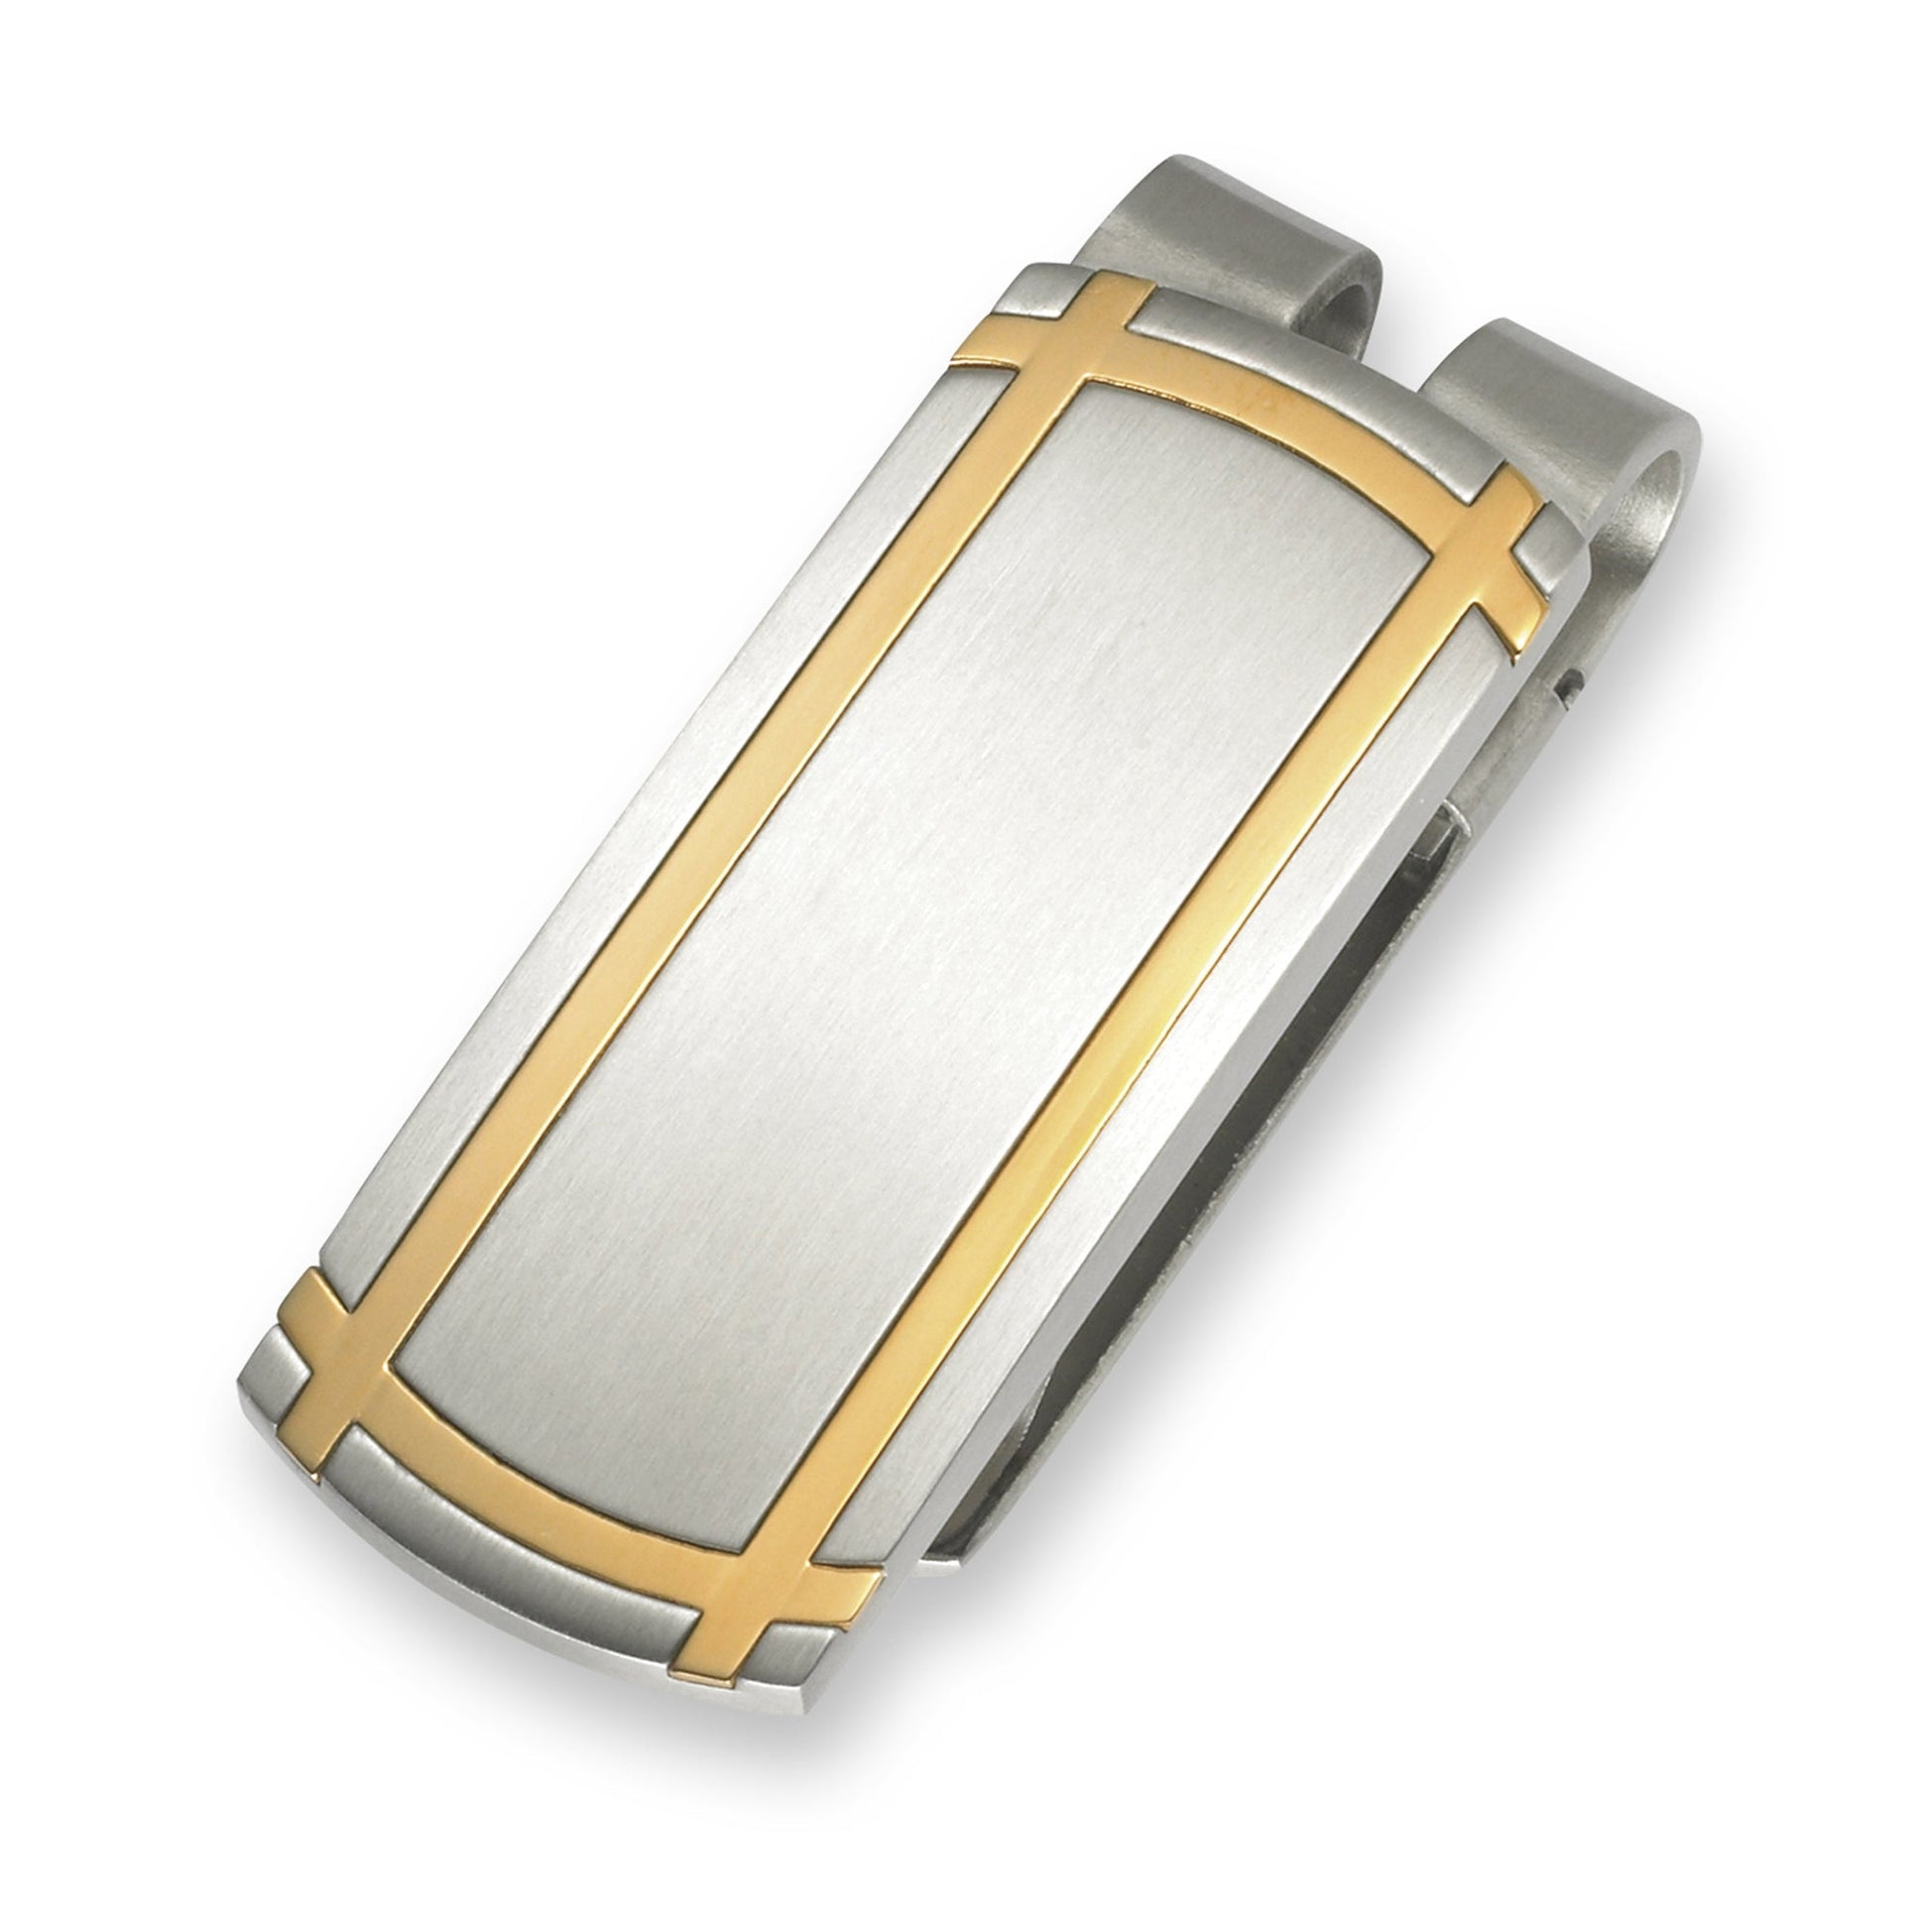 A stainless steel satined money clip with gold-tone geometric bands displayed on a neutral white background.